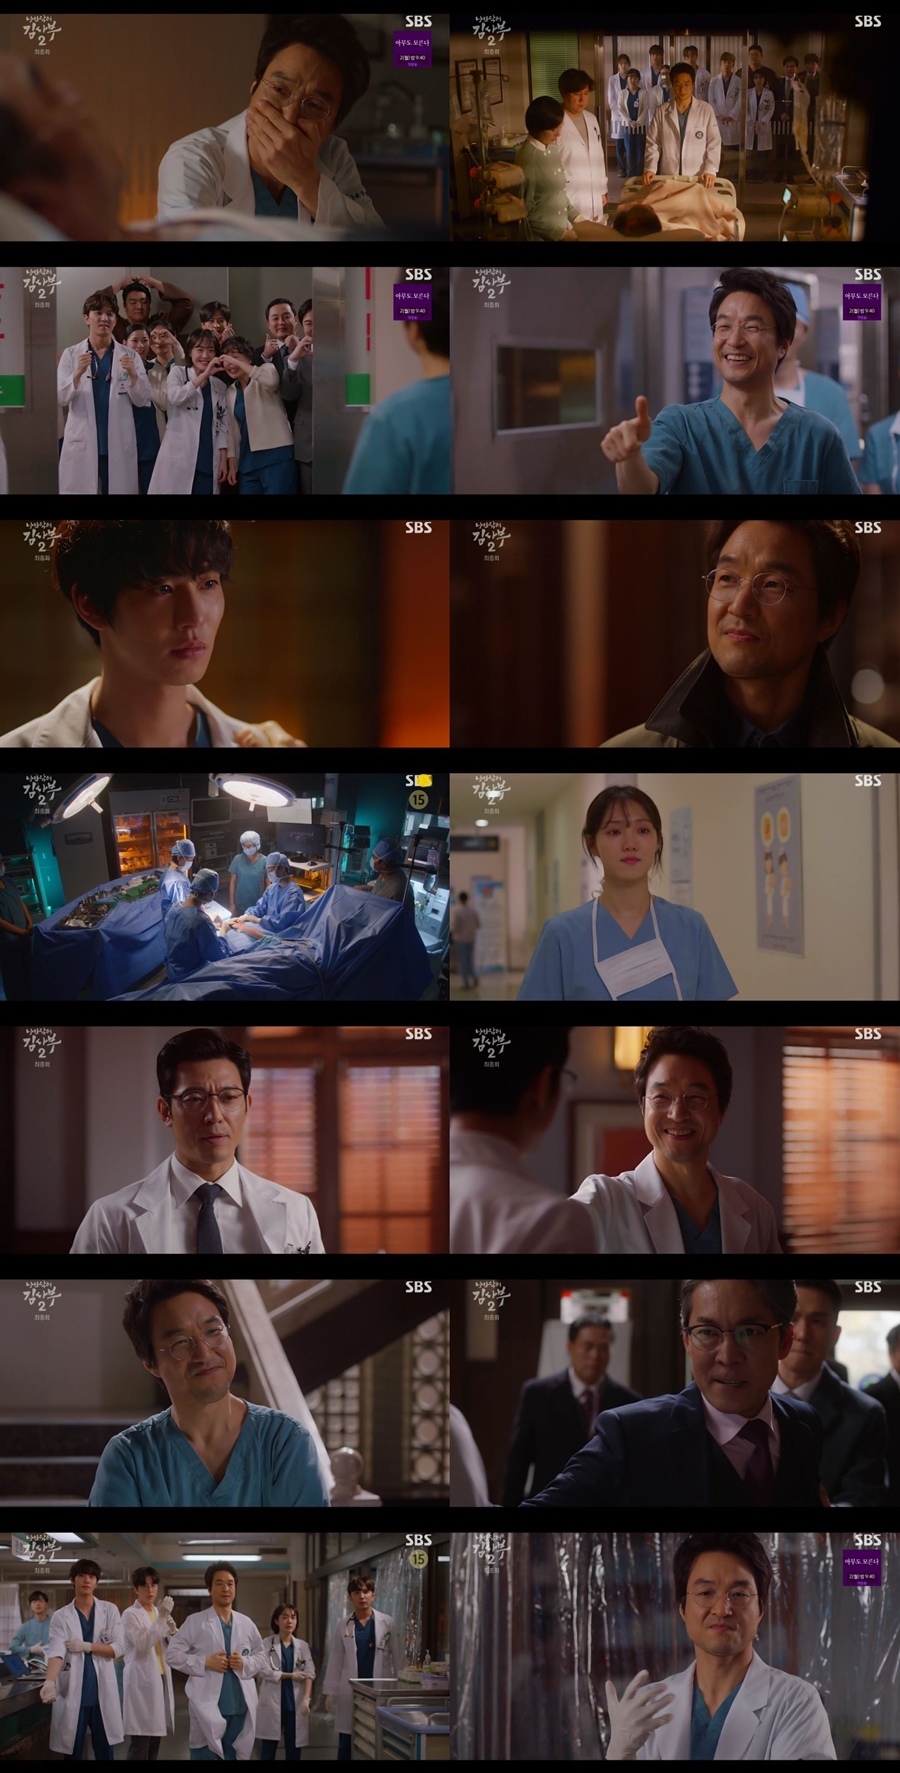 SBS Romantic Doctor Kim Sabu 2 27.1% of its own top TV viewer ratings, the heart of the heart was warmed up to the end of the message ended.The final episode of SBS monthly drama Romantic Doctor Kim Sabu 2, which was broadcast on the 25th, recorded 27.1% of Nielsen Koreas third part of the national TV viewer ratings. In addition to the record of exceeding 25% in three years among the mini-series dramas, The beauty of the world.In the final episode, Kim Sabu (Han Suk-kyu) eventually protected Doldam Hospital independently at Geo University Hospital after ups and downs, and then covered Park Min-guk (Kim Joo-heon) to complete a solid Doldamjas such as Lee Sung-kyung and Ahn Hyo-seop.In the drama, Kim Sa-bu was distressed when the female director (Kim Hong-pa), who had set up consciousness, expressed his opinion on the dignity, saying he did not want further life-saving treatment.In the end, Kim accepted the will of the director, and the director of the hospital was silently breathed as the medical staff of the stone wall watched.After that, Kim asked Park Min-guk for three weeks of emergency surgery ahead of CTS surgery, and moved to Park Min-guks heart.And Seo Woo-jin searched the Monodle Project file and found Kim Sabus diagnosis name of multiple sclerosis, and Kim Sabu confirmed with a smile in Seo Woo-jins answer.Kim Sabu, who entered the operating room with the support of all medical staff at Doldam Hospital, successfully underwent wrist surgery.However, Do Yun-wan (Choi Jin-ho), who was trying to remove Doldam Hospital and Kim Sa-bu, tried to resign Kim Sa-bu by suggesting that he was MS, and Kim Sa-bu declared that he became an independent corporation according to the will of Shin, saying, Doldam Hospital is supported by the big hospital but maintains management and hospital system independently.With the news that a large fire occurred behind Do Yoon-wan, who turned away with anger, the Protecting Kim Sa-bu and the Stone Damages in the emergency room, echoed the Law of Romantic Preservation, which recalled beautiful values.We would like to express our sincere gratitude to many viewers who have consistently given their warm support and explosive attention to the romantic doctor Kim Sabu 2, following the romantic doctor Kim Sabu 1,, said Samhwa Networks.I am grateful for your love and affection for the romantic doctor Kim Sabu 2, which was started by the enthusiastic support of viewers.I hope that you have gained warm comfort for a while in your tired and difficult daily life through Romantic Doctor Kim Sabu 2, and I hope that Kim Sabus romance will be remembered in all of you for a long time. 